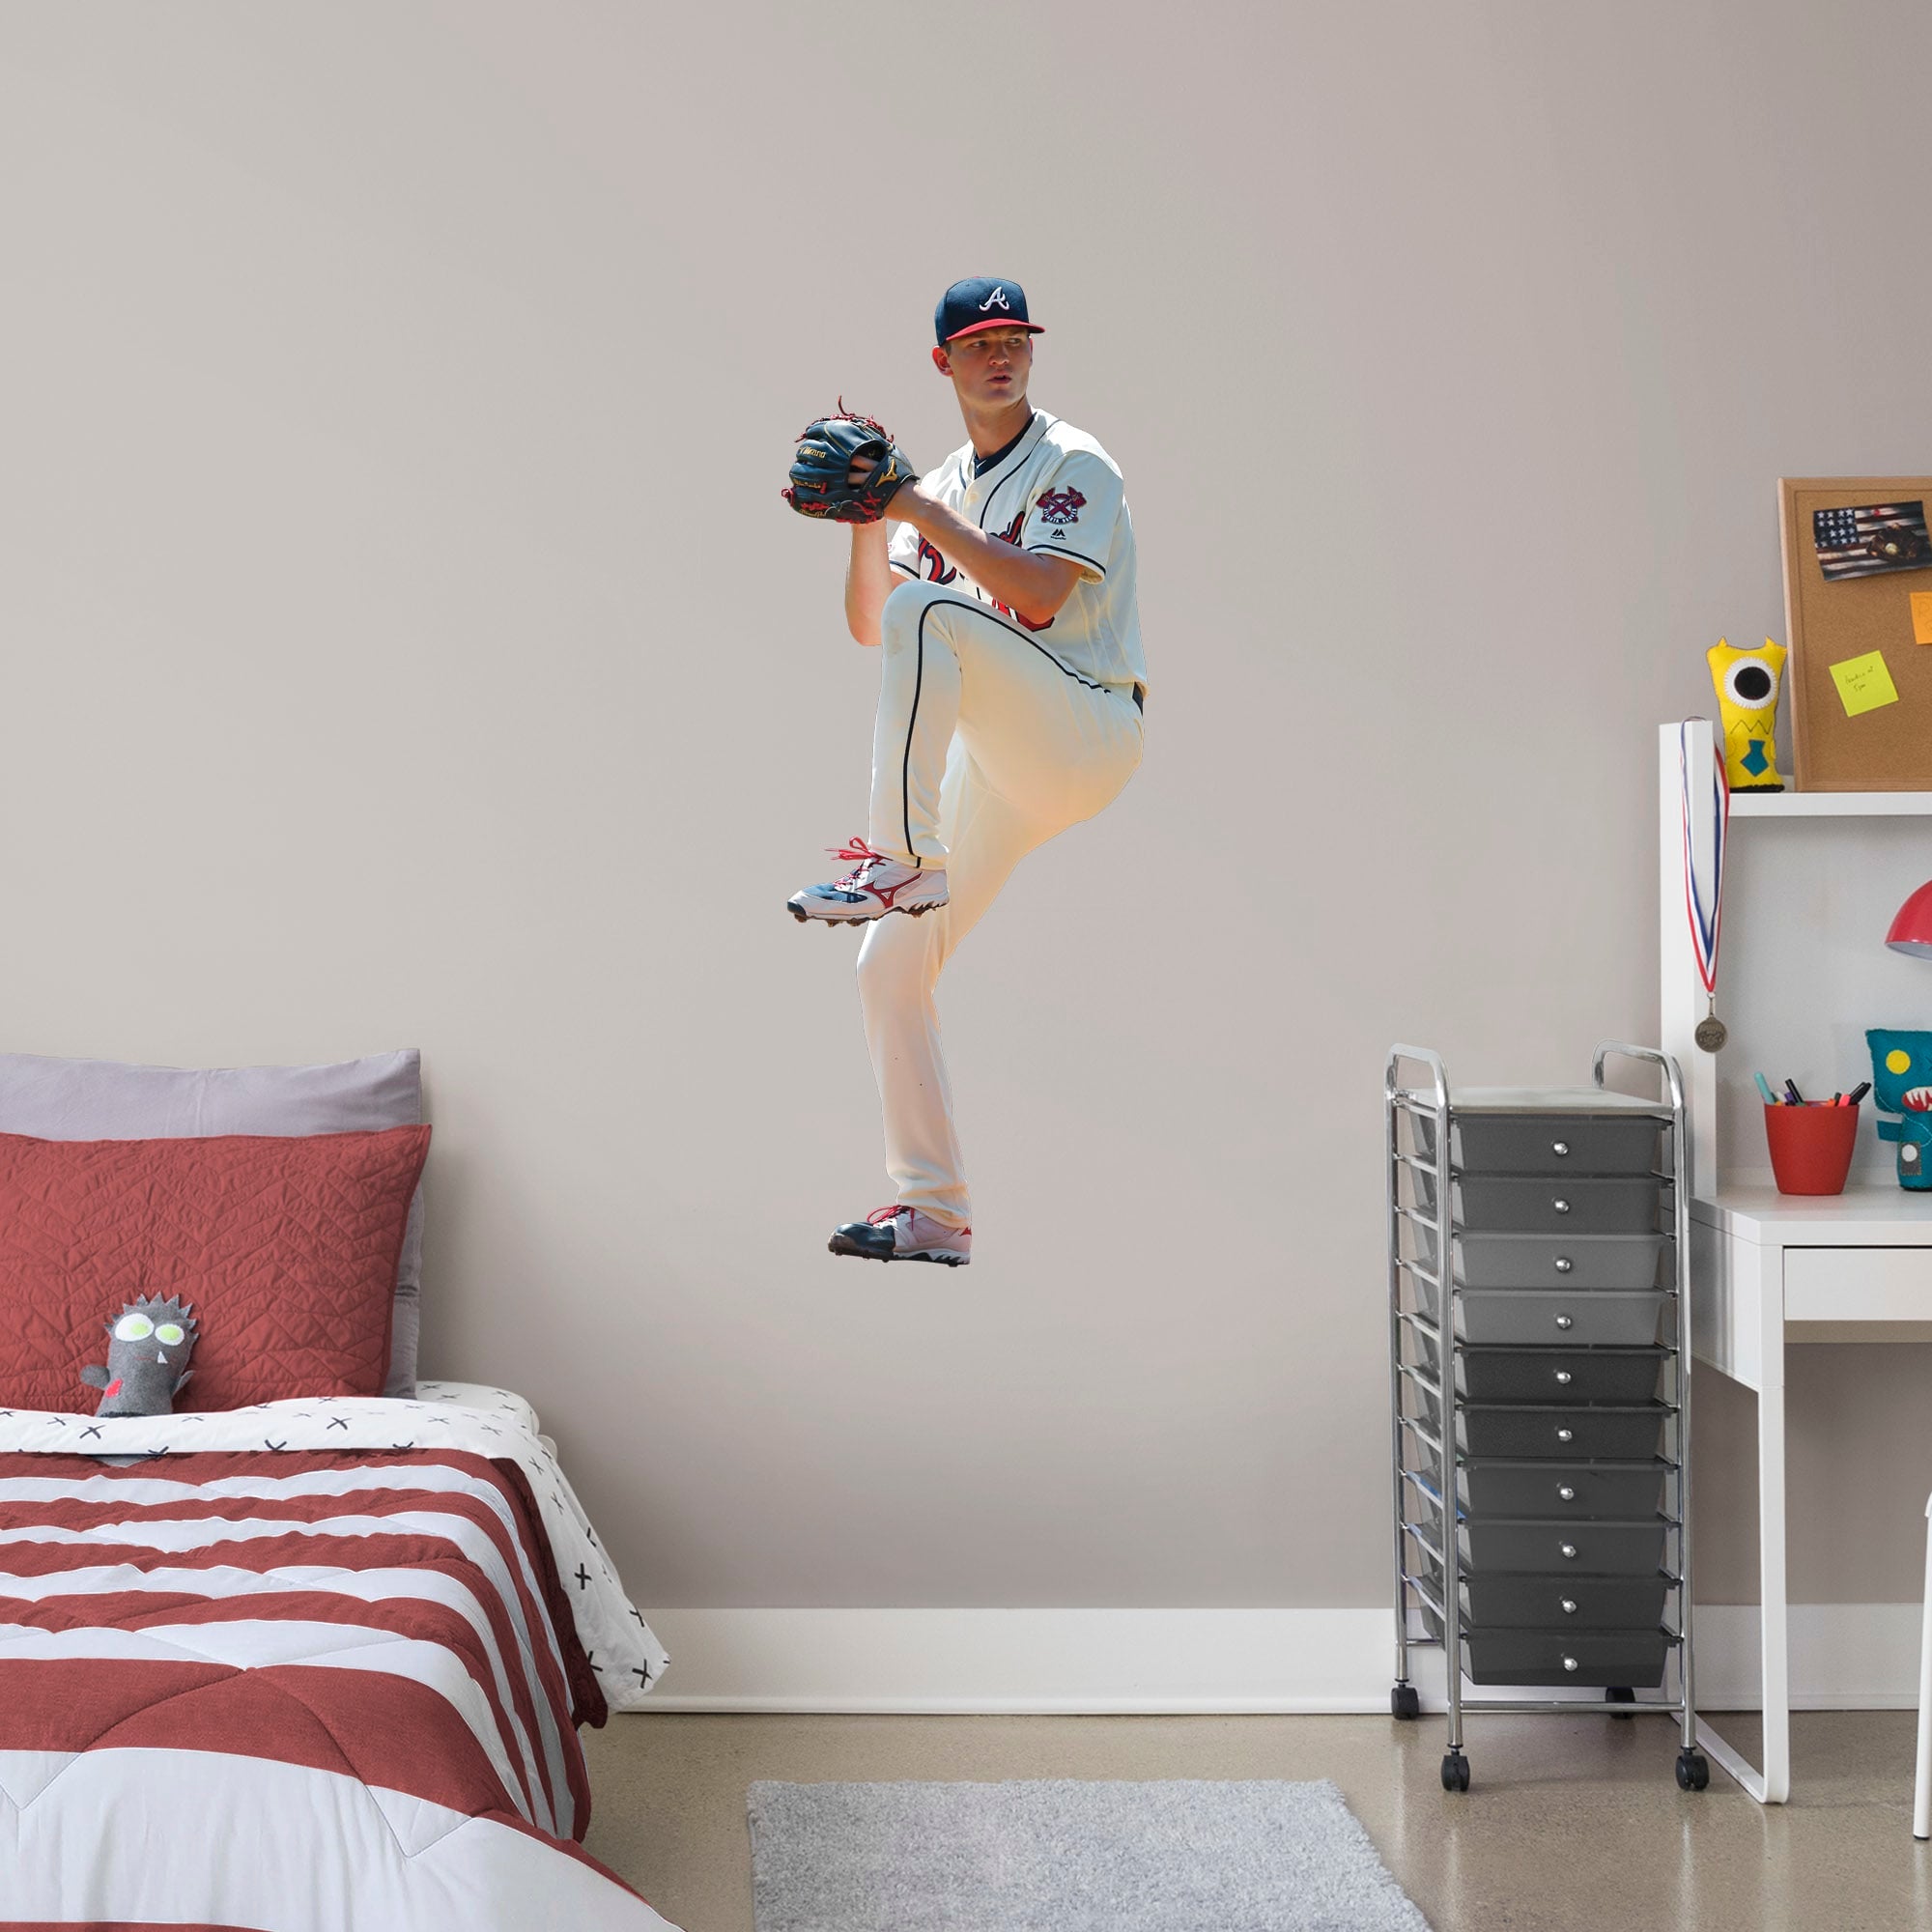 Mike Soroka for Atlanta Braves - Officially Licensed MLB Removable Wall Decal Giant Athlete + 2 Decals (19"W x 51"H) by Fathead